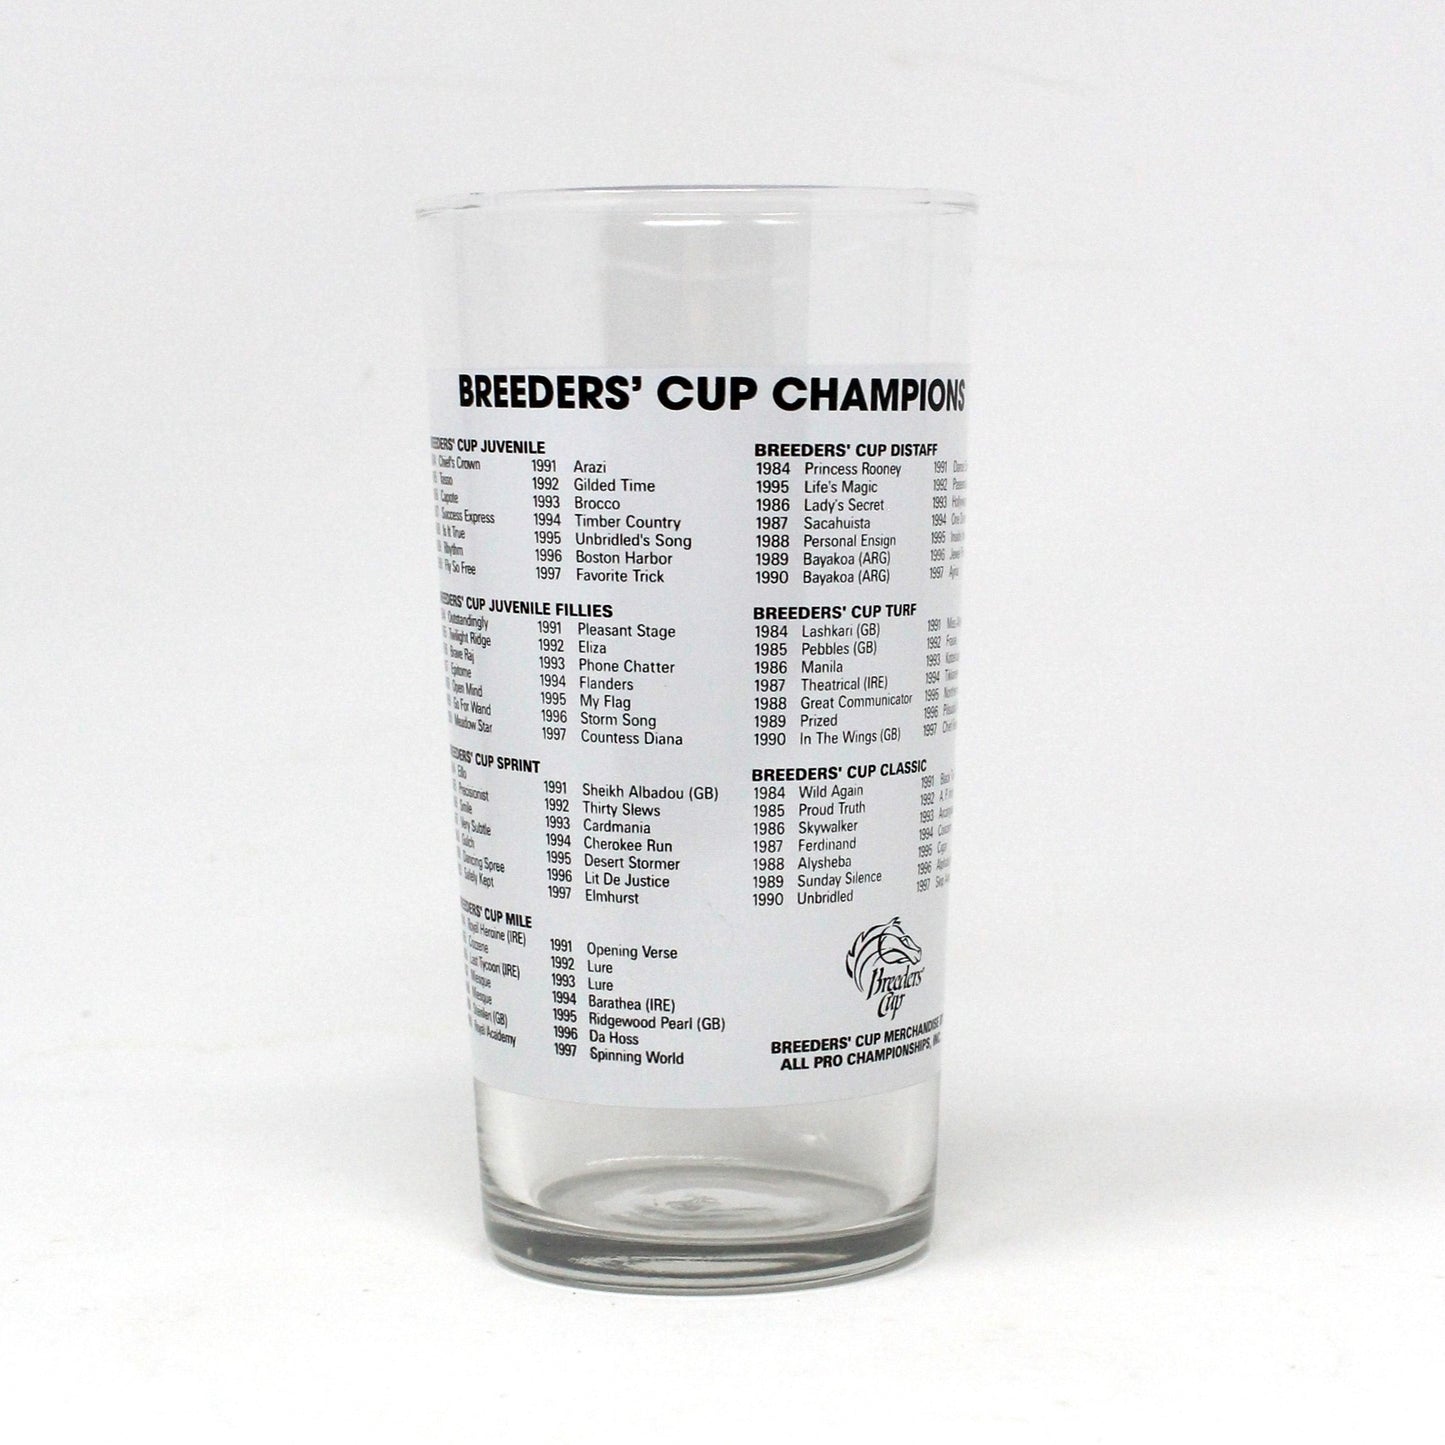 Mint Julep Glass, Breeders' Cup, Churchill Downs, 1998 Vintage Collectible